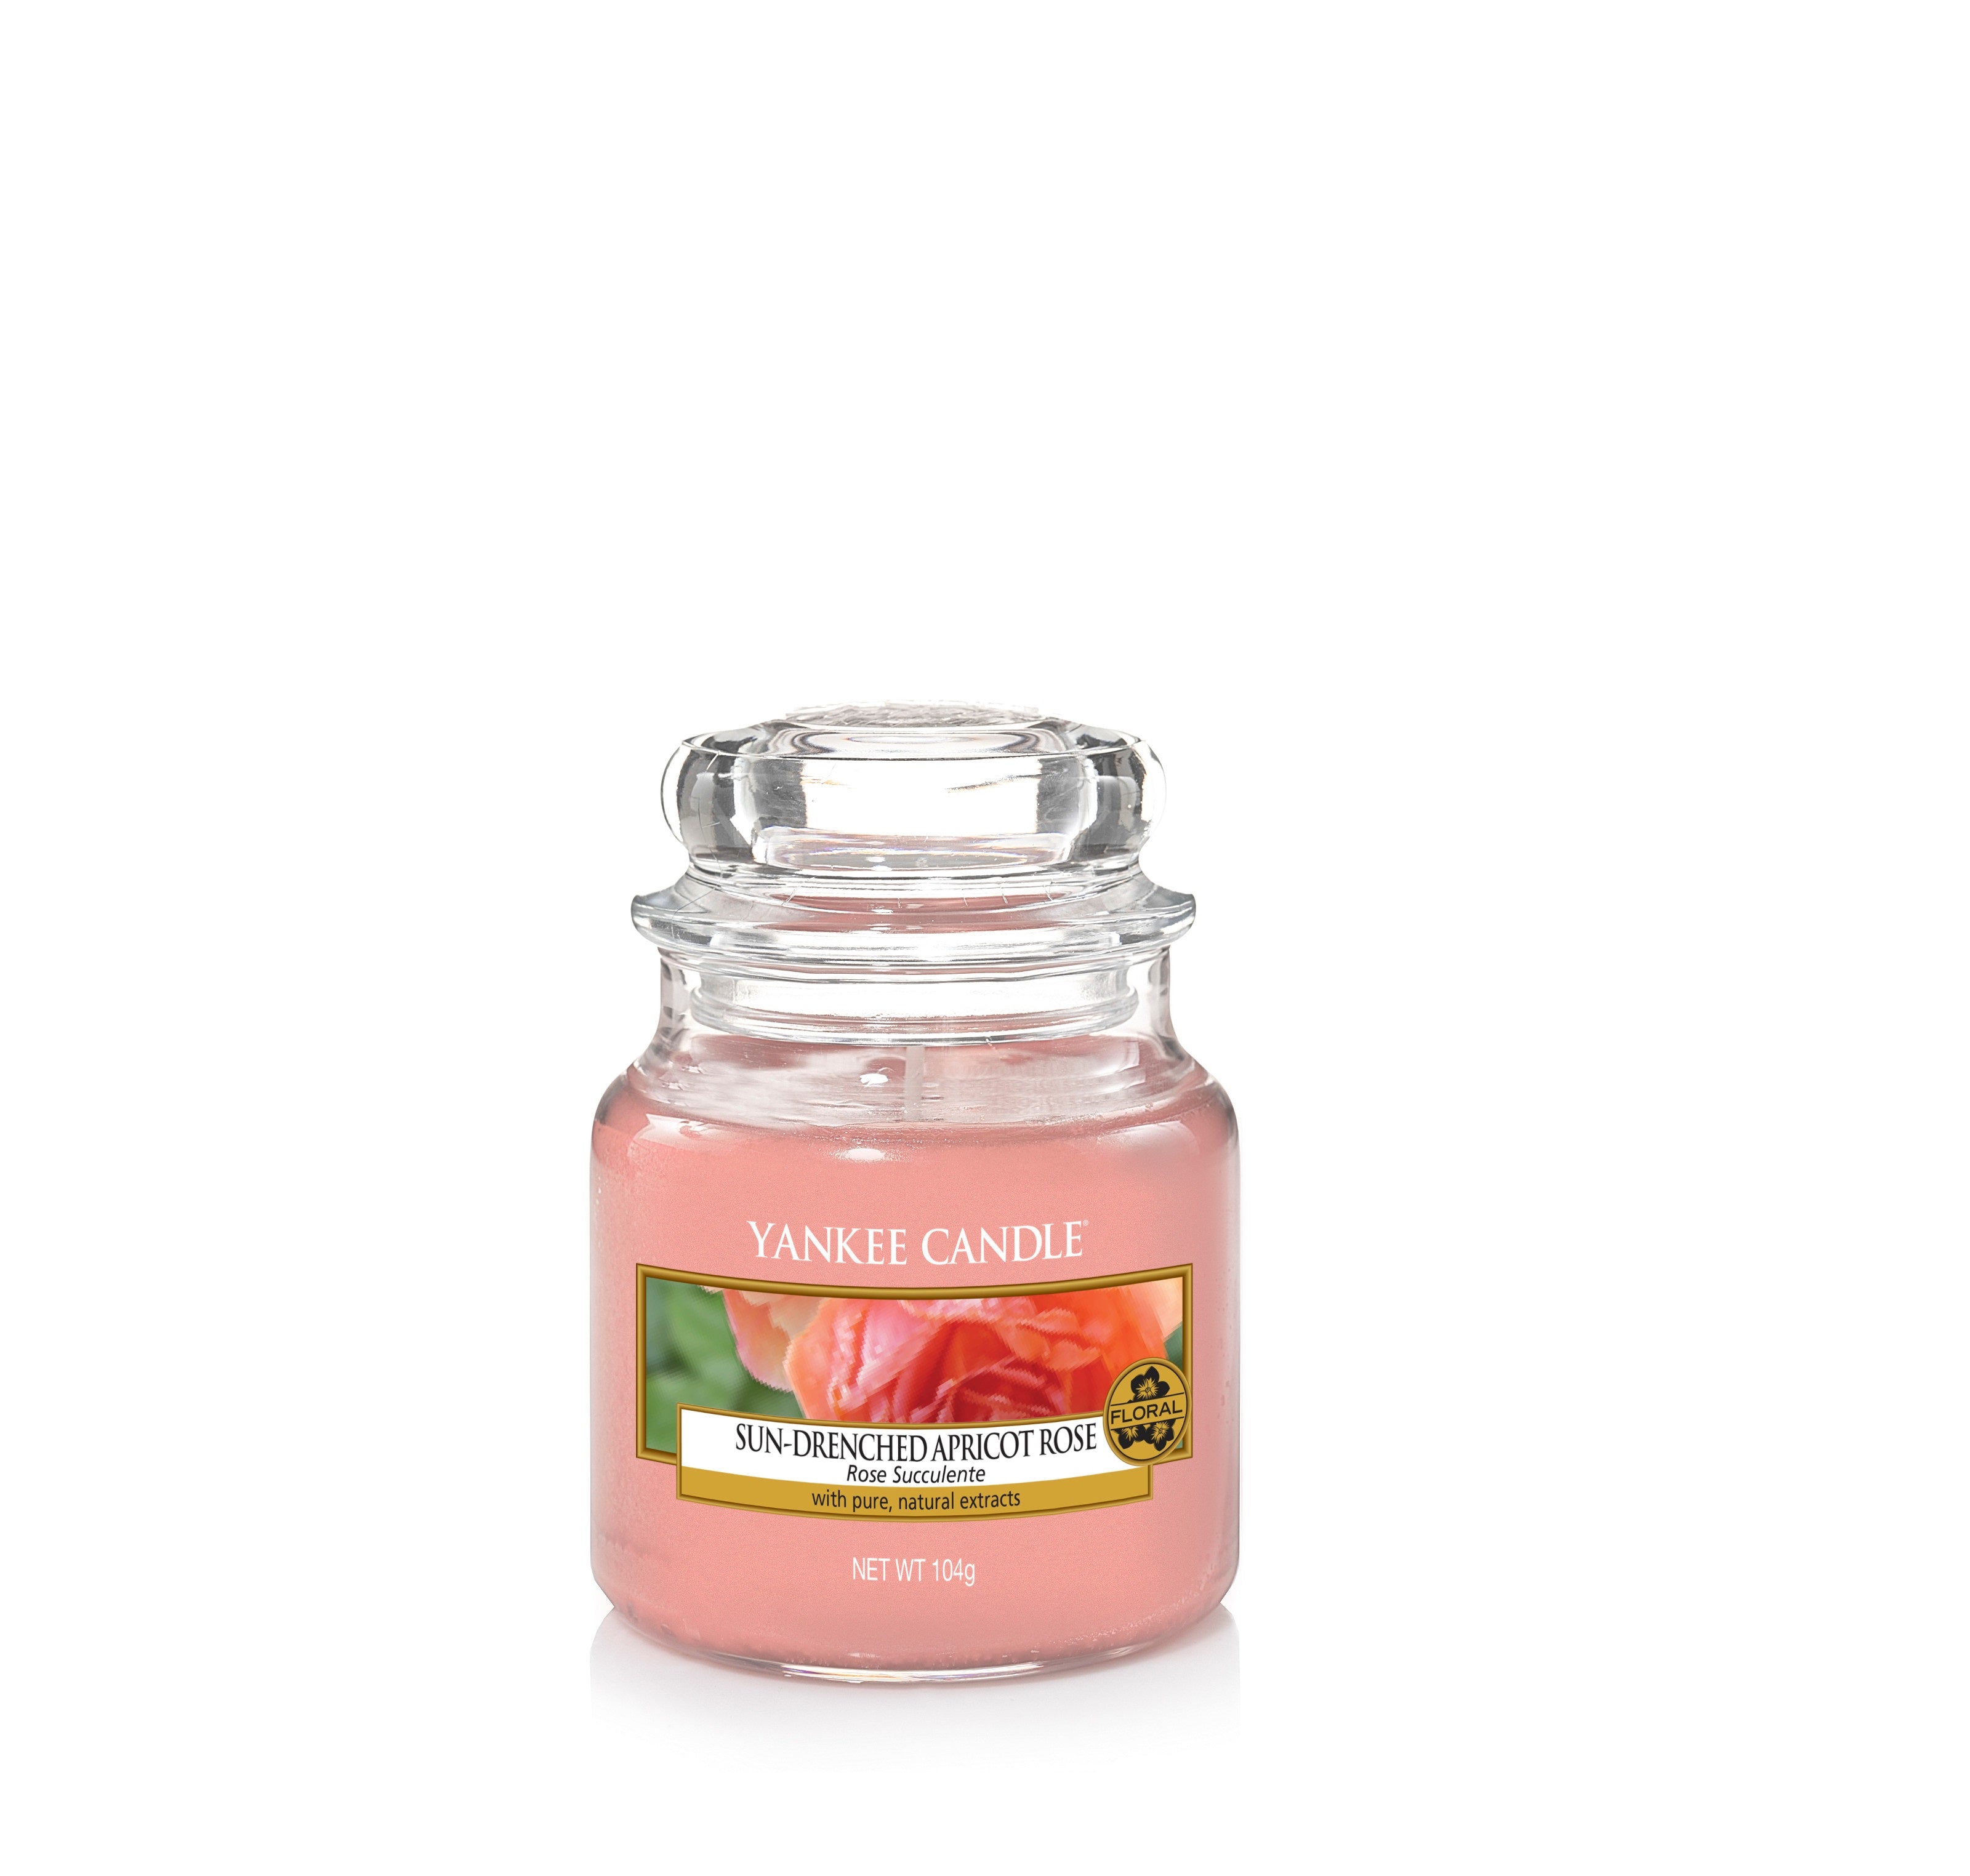 SUN-DRENCHED APRICOT ROSE -Yankee Candle- Giara Piccola